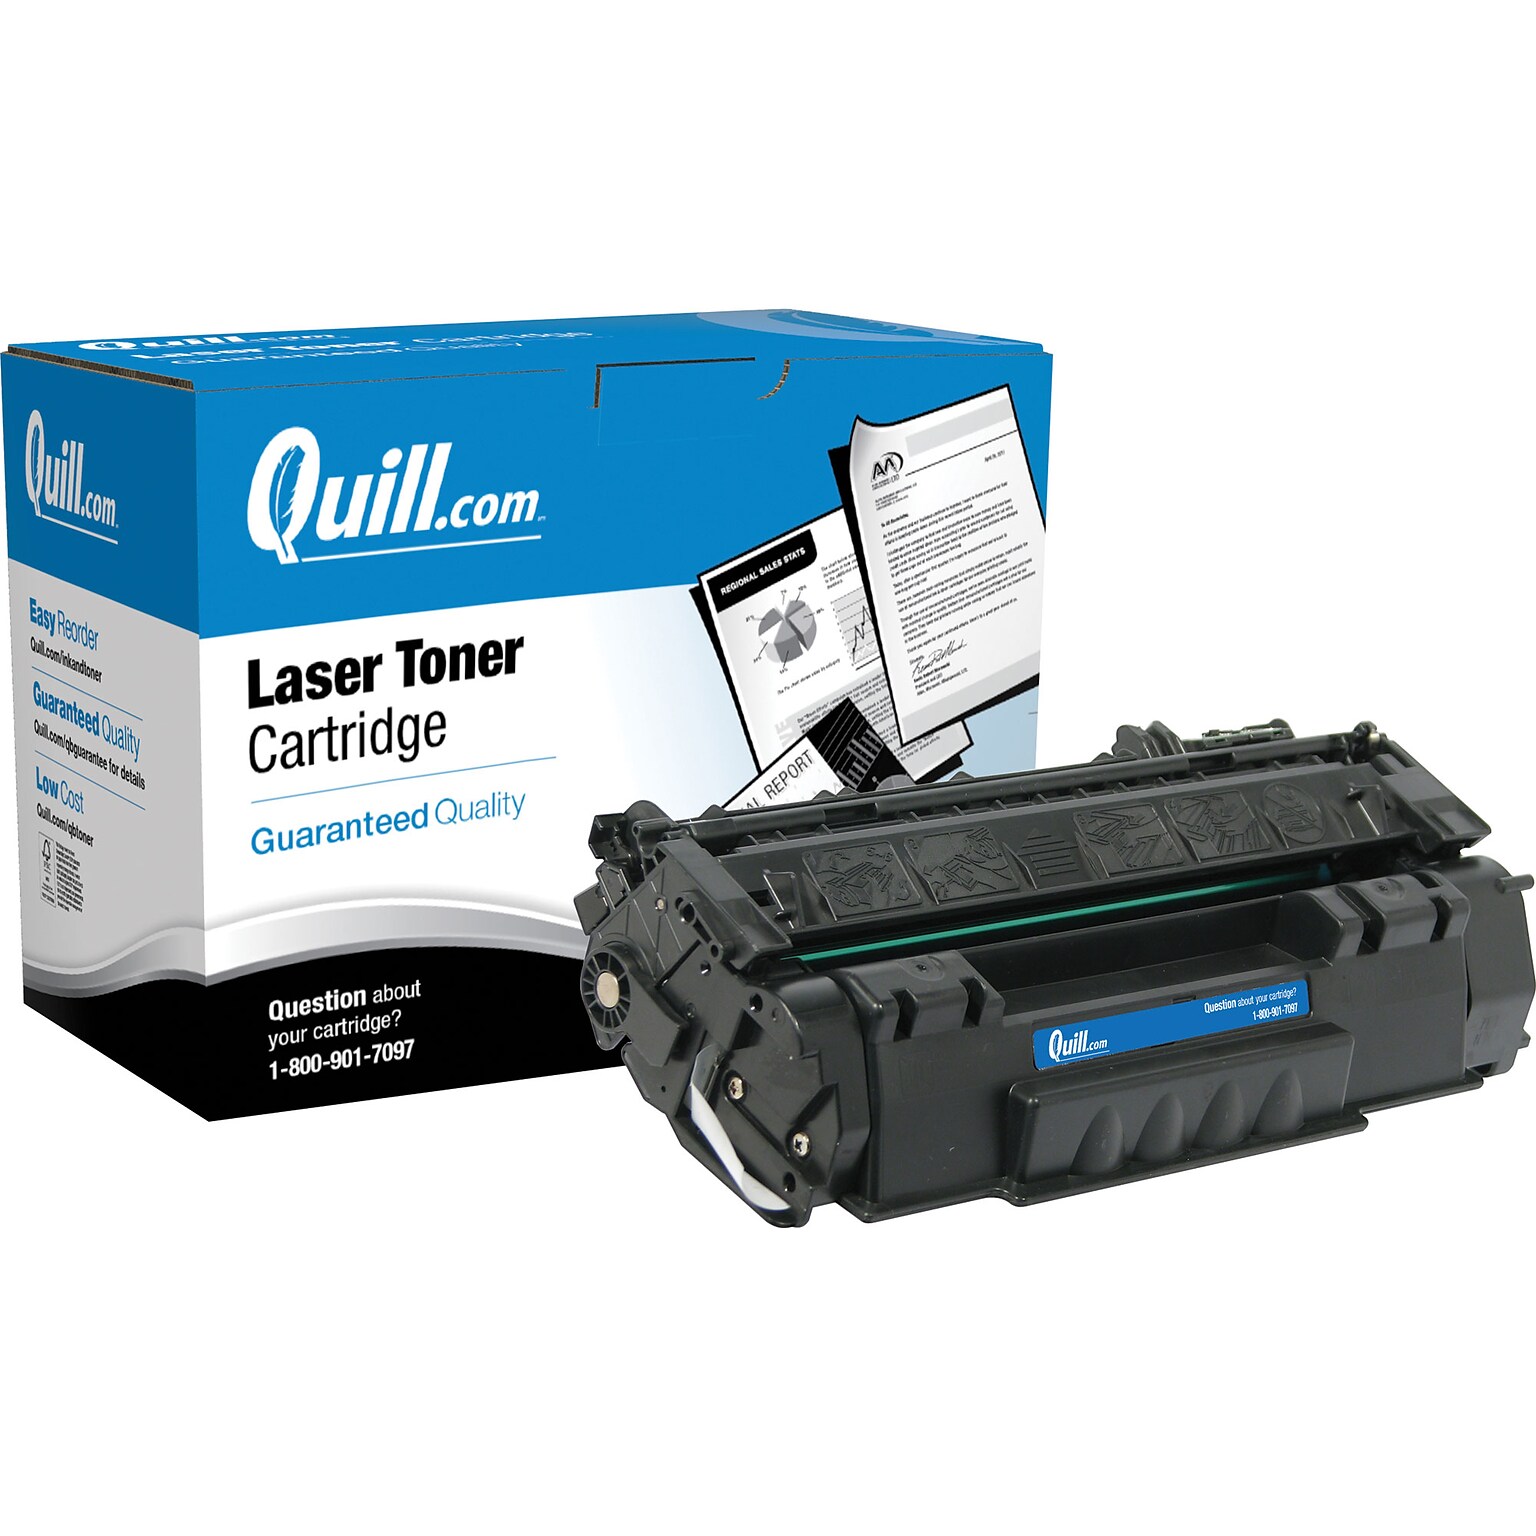 Quill Brand Remanufactured HP 49X (Q5949X) Black Extra High Yield Laser Toner Cartridge (100% Satisfaction Guaranteed)